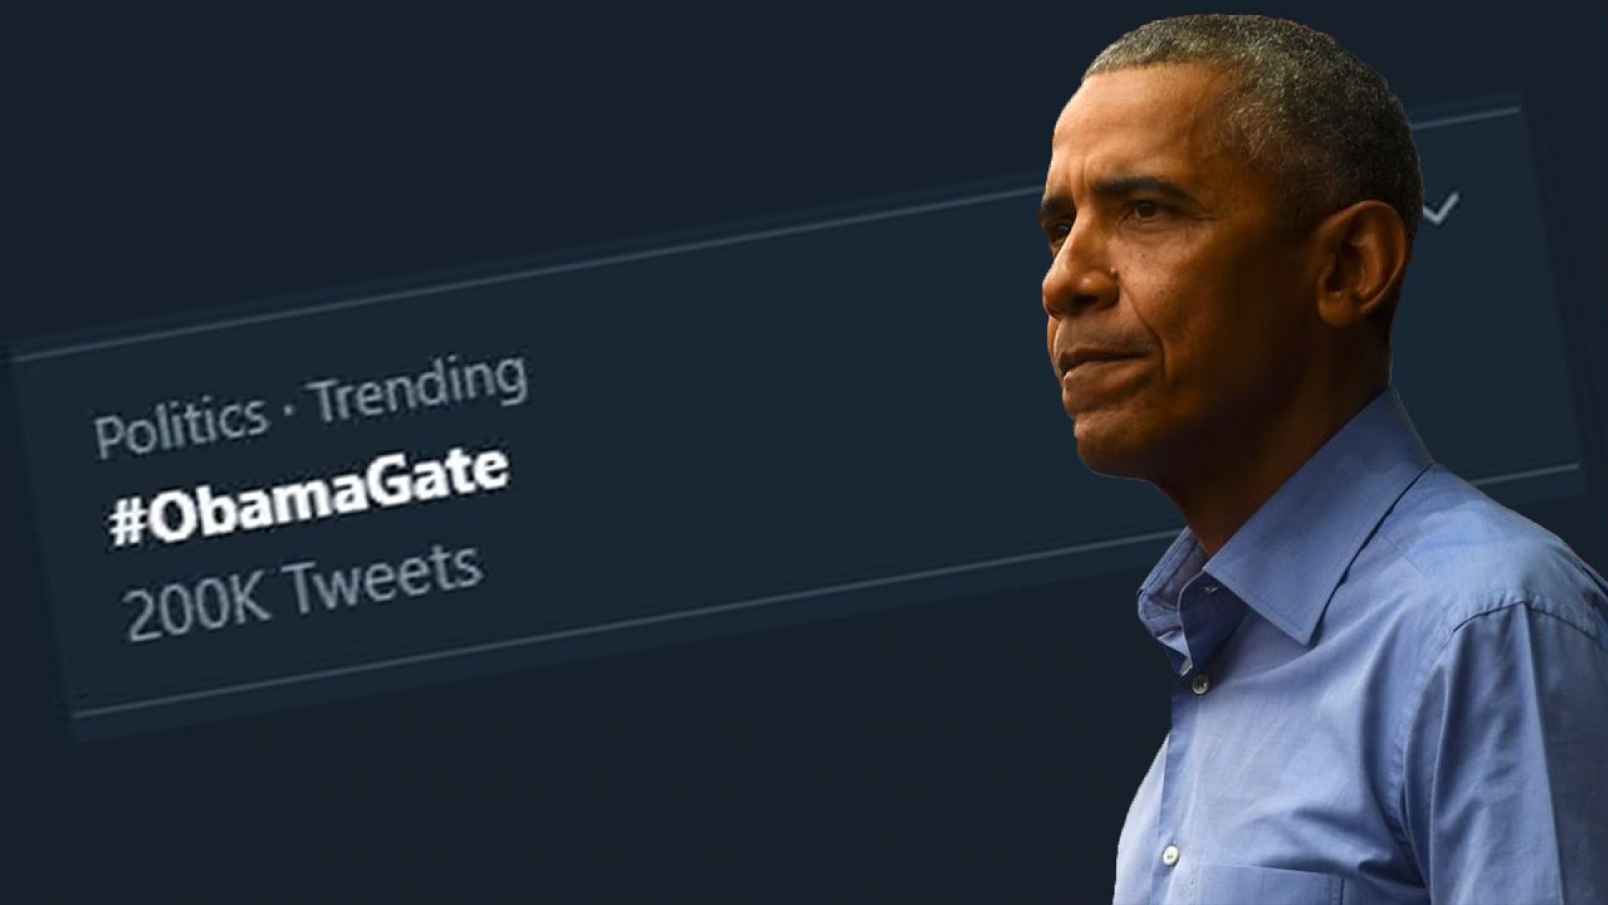 What is Obamagate? No one seems to know